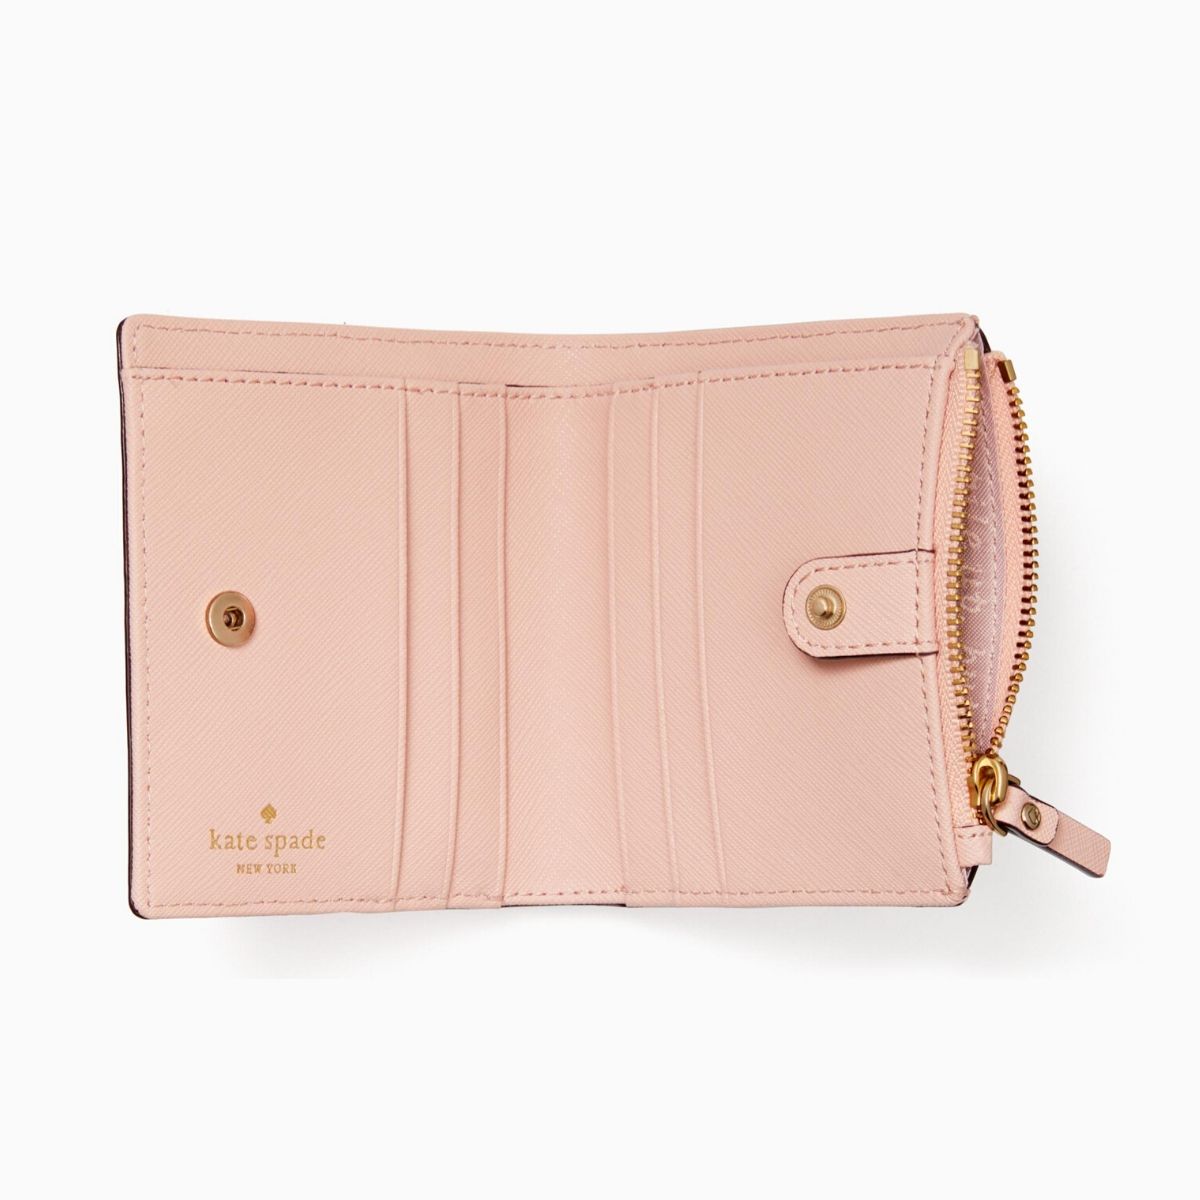 Kate spade new york Wallets & Card Cases for Women